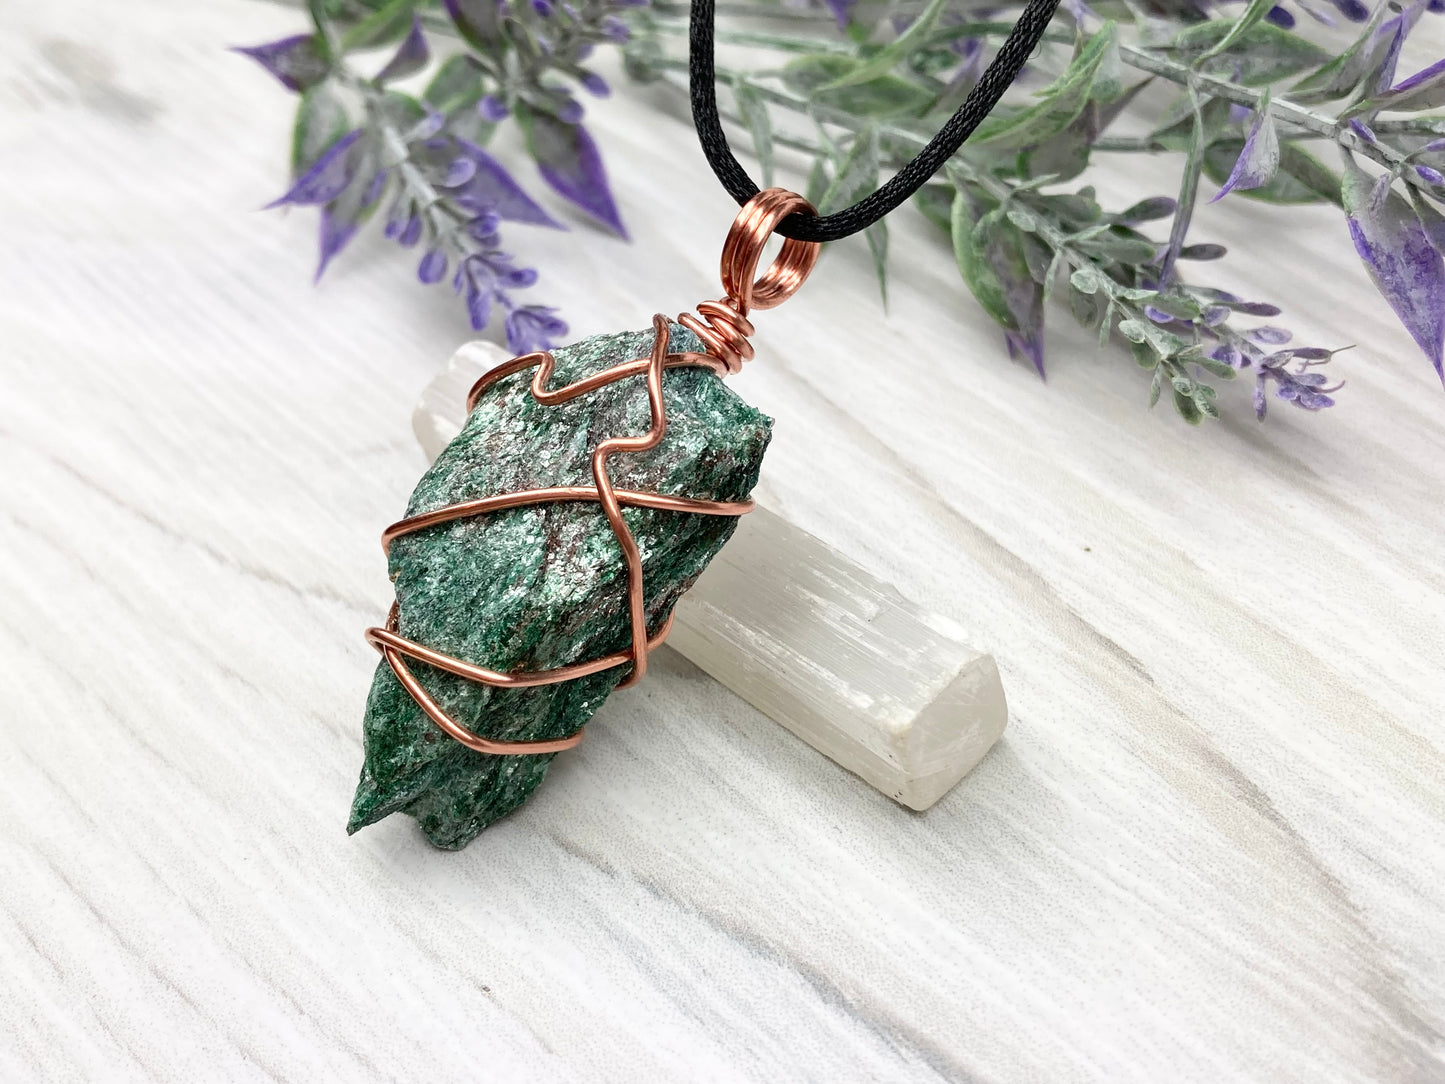 Raw Fuchsite Necklace. Copper Wire Wrapped Crystal Pendant. Shimmery Green Stone. Comes On A Black chain. Handmade New Age Jewelry.